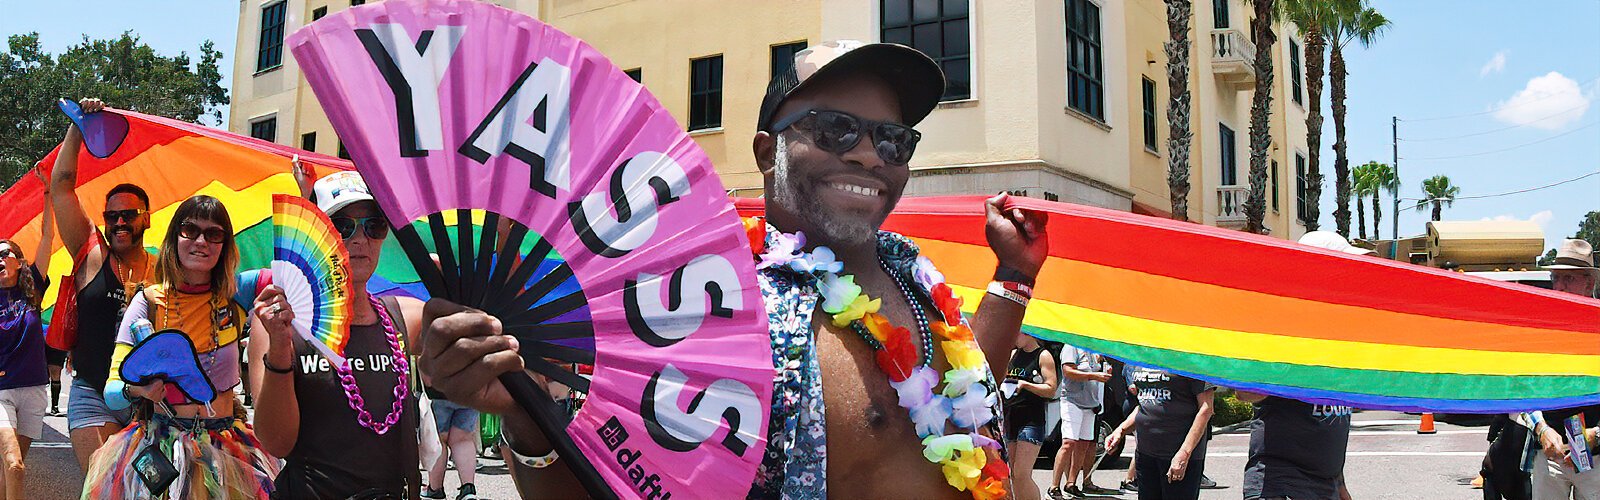 Walking along and holding the ultra-long Pride banner, a festival goer waves a large fan adorned with "Yasss," an excited interjection that means "Yes!" in LGBTQ slang.